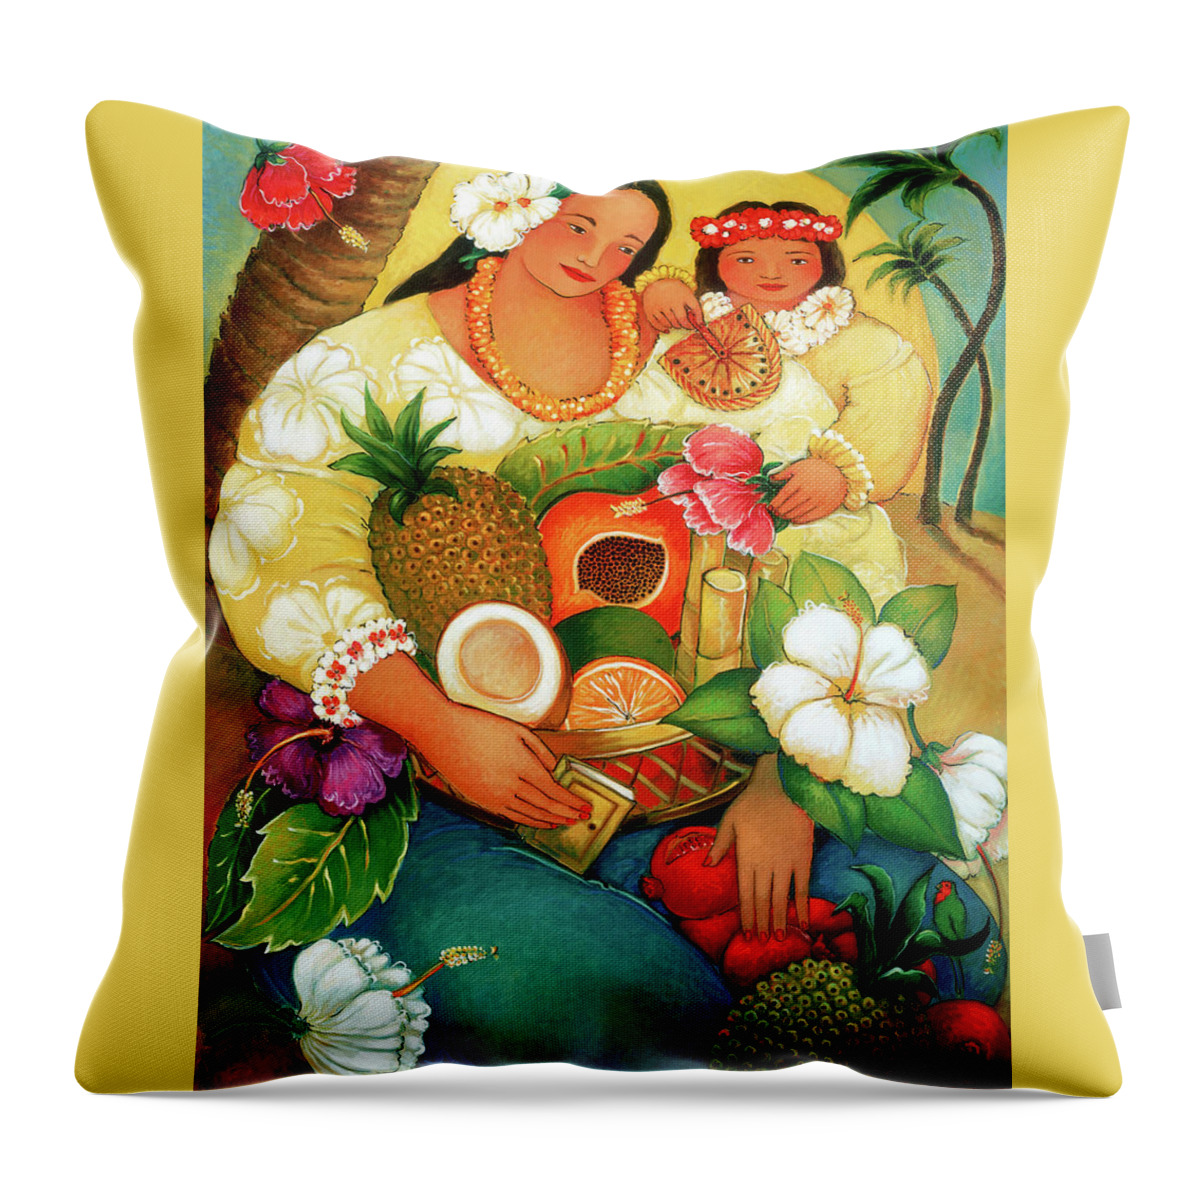 Island Throw Pillow featuring the painting Island Madonna by Linda Carter Holman